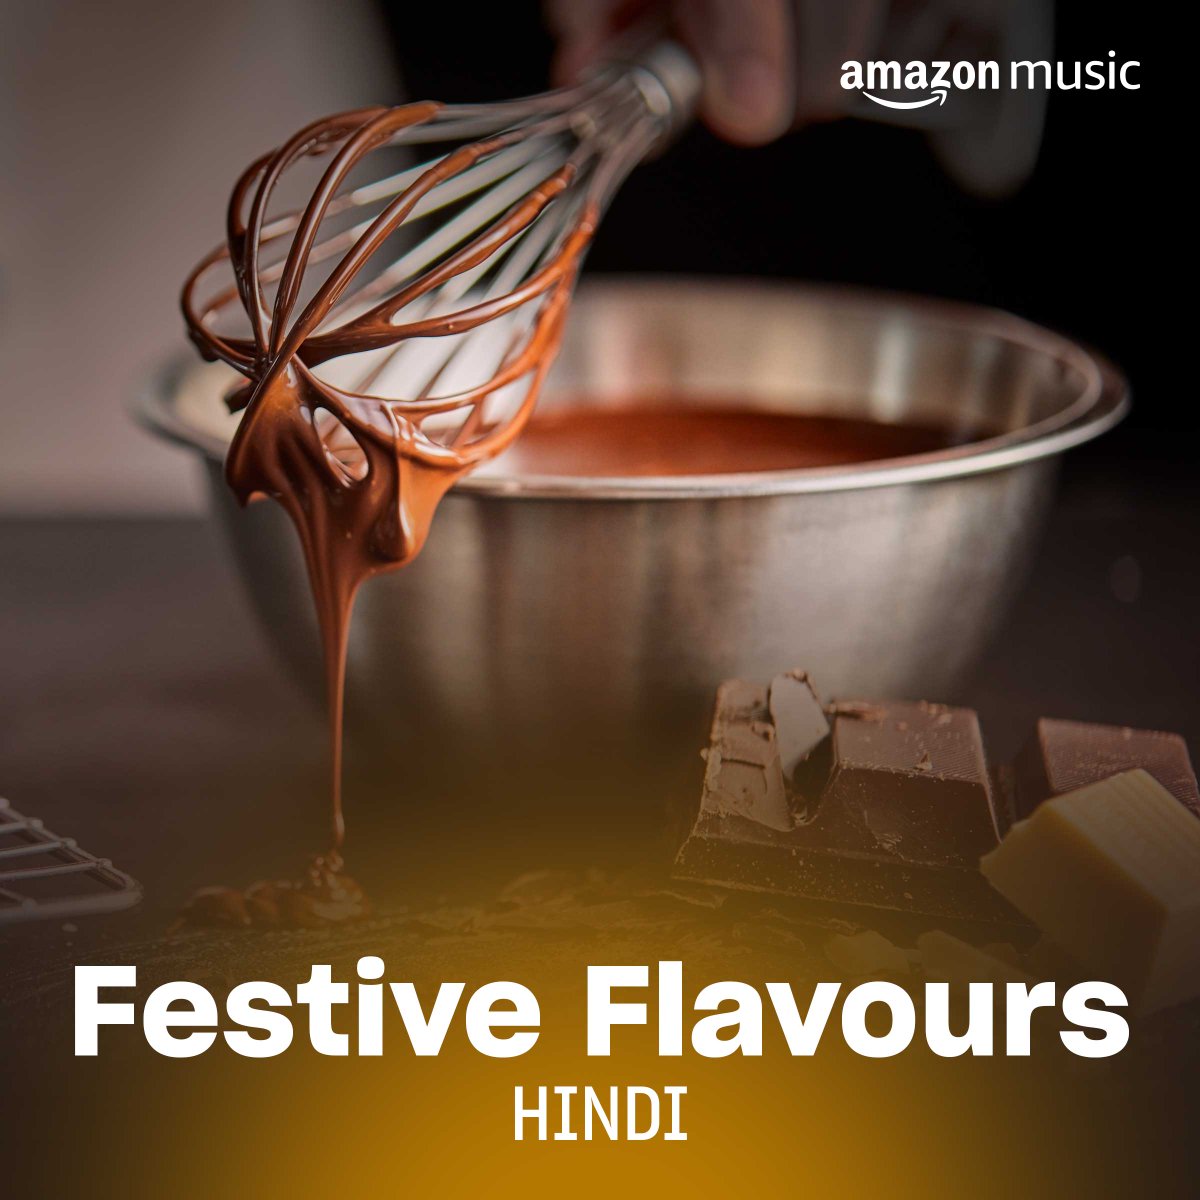 Get your daily dose of @NikhitaGandhi & @qaranx on #FestiveFlavoursHindi and set the mood to groove 💃 amzn.to/470b9H1